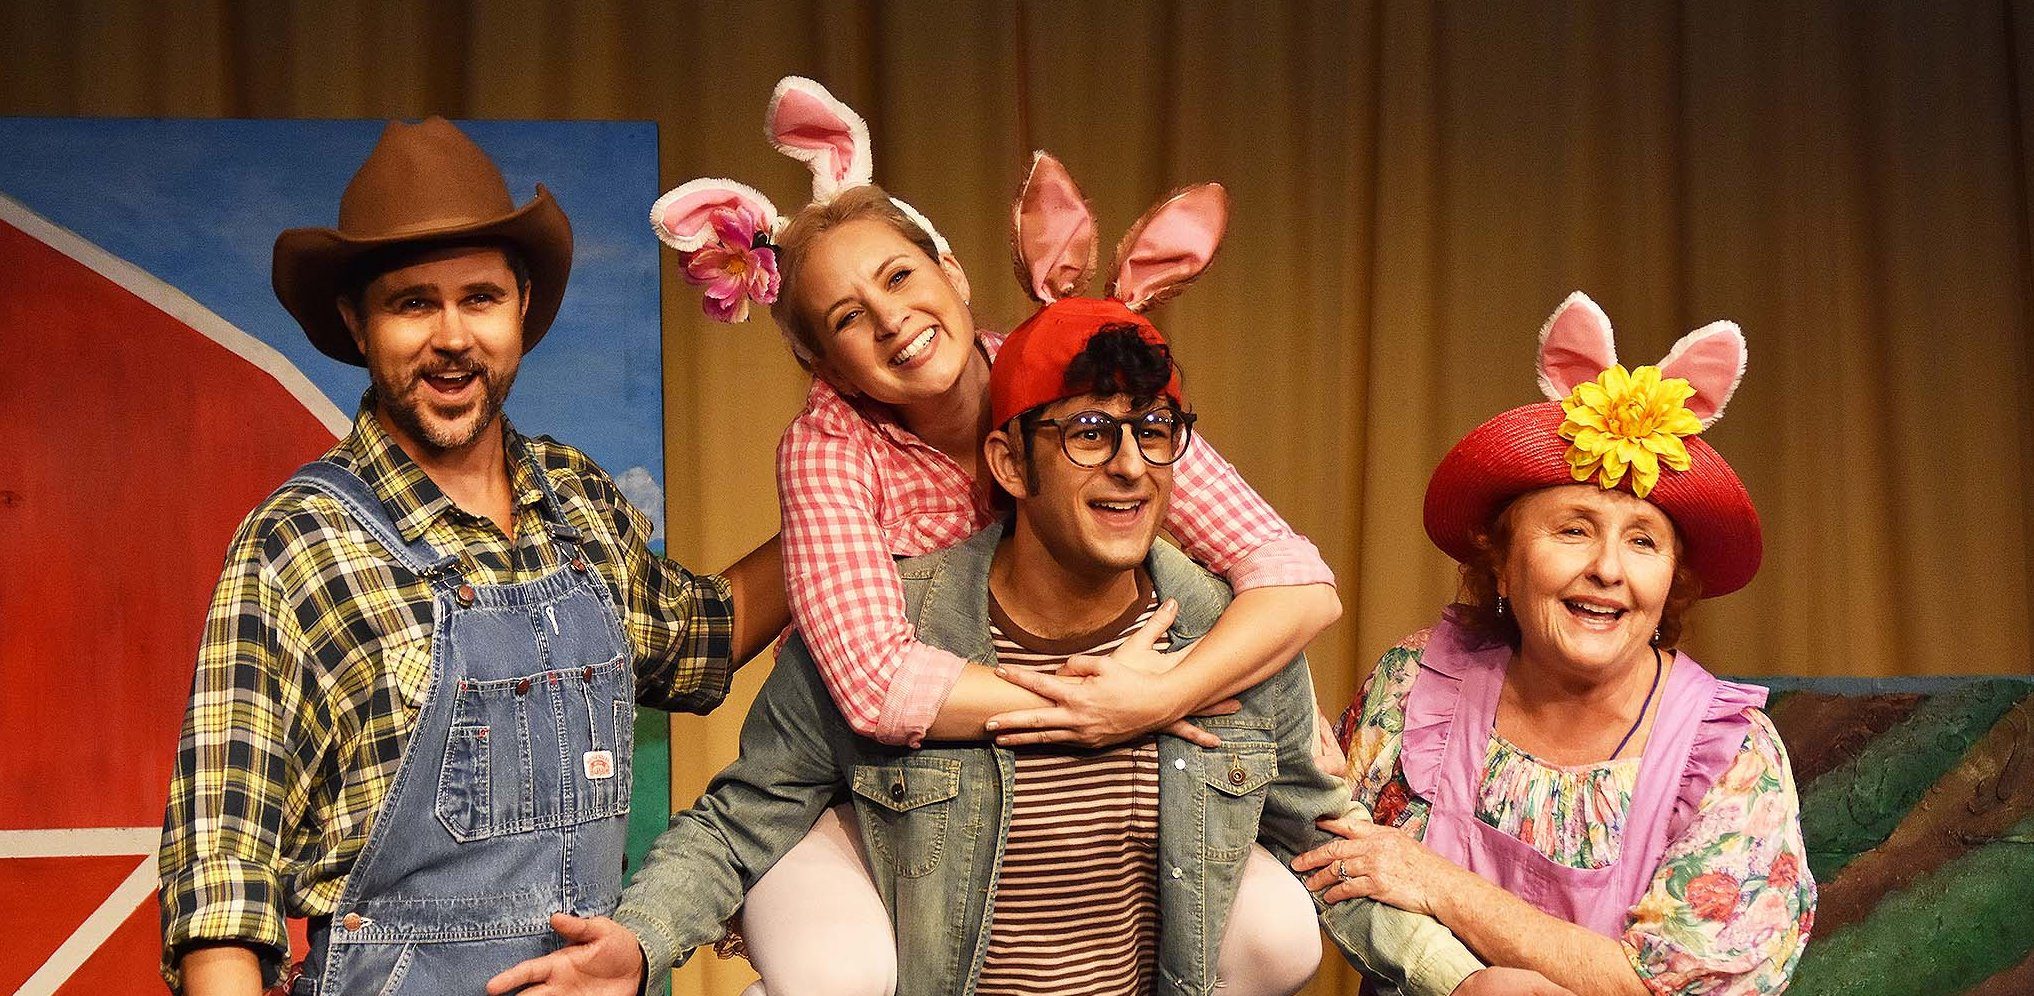 WORLD PREMIERE OF A PETER RABBIT MUSCAL